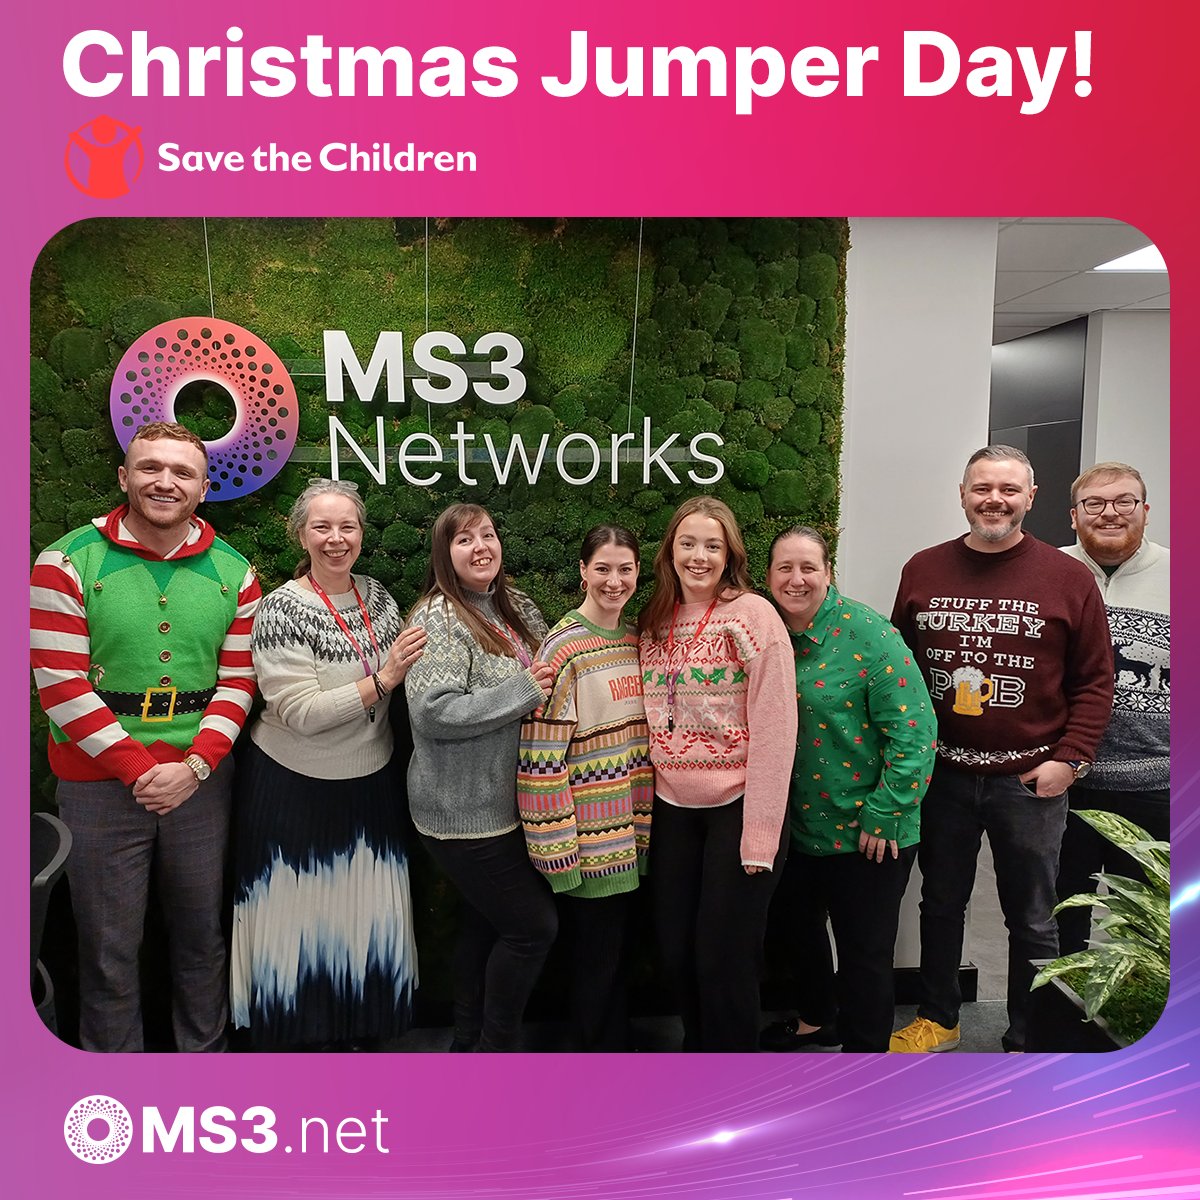 Team MS3 have been getting in the festive spirit today as we celebrated Christmas Jumper Day! It was so great to see our team in their festive jumpers, raising money for a brilliant cause; @savechildrenuk. To find out everything you need to know about Christmas Jumper Day or to…